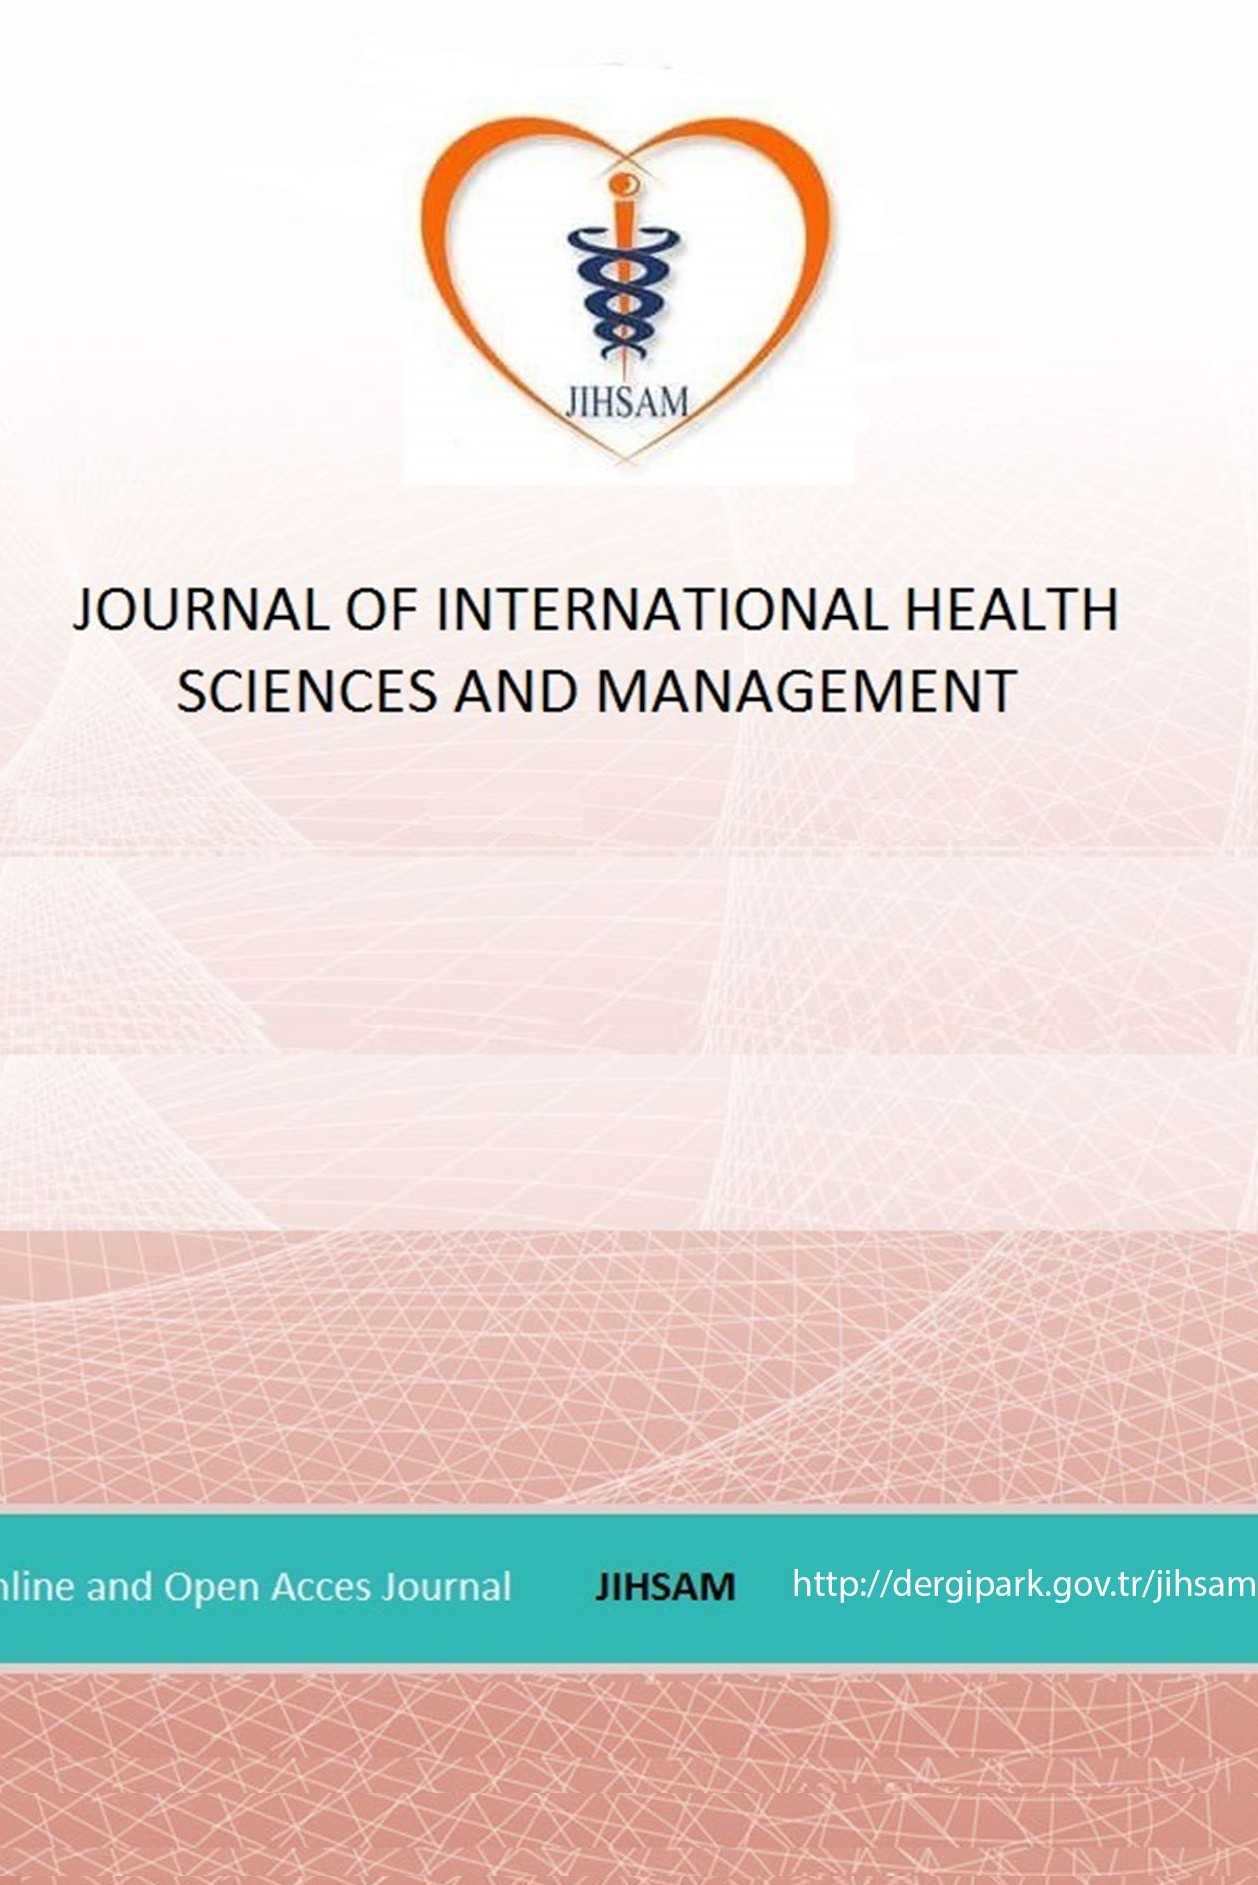 Journal of International Health Sciences and Management